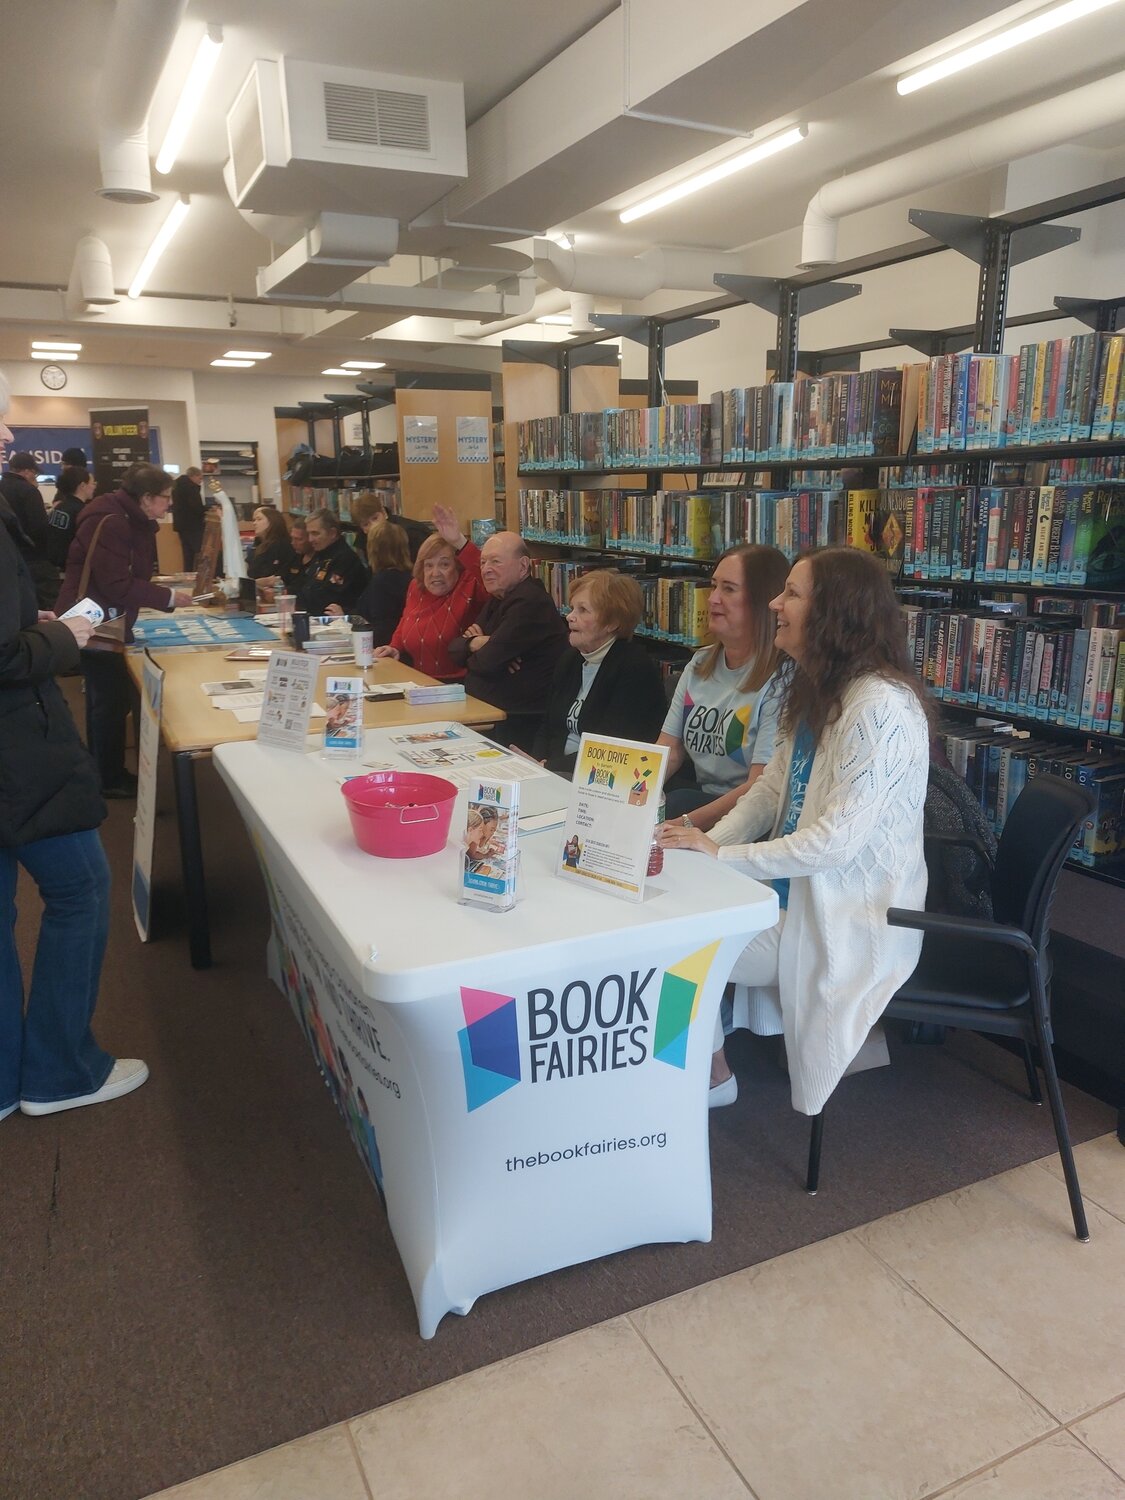 Book Fairies, a non-profit organization in Freeport which sources and redistributes books to under-resourced communities on Long Island and internationally set up a table and welcomed those interested